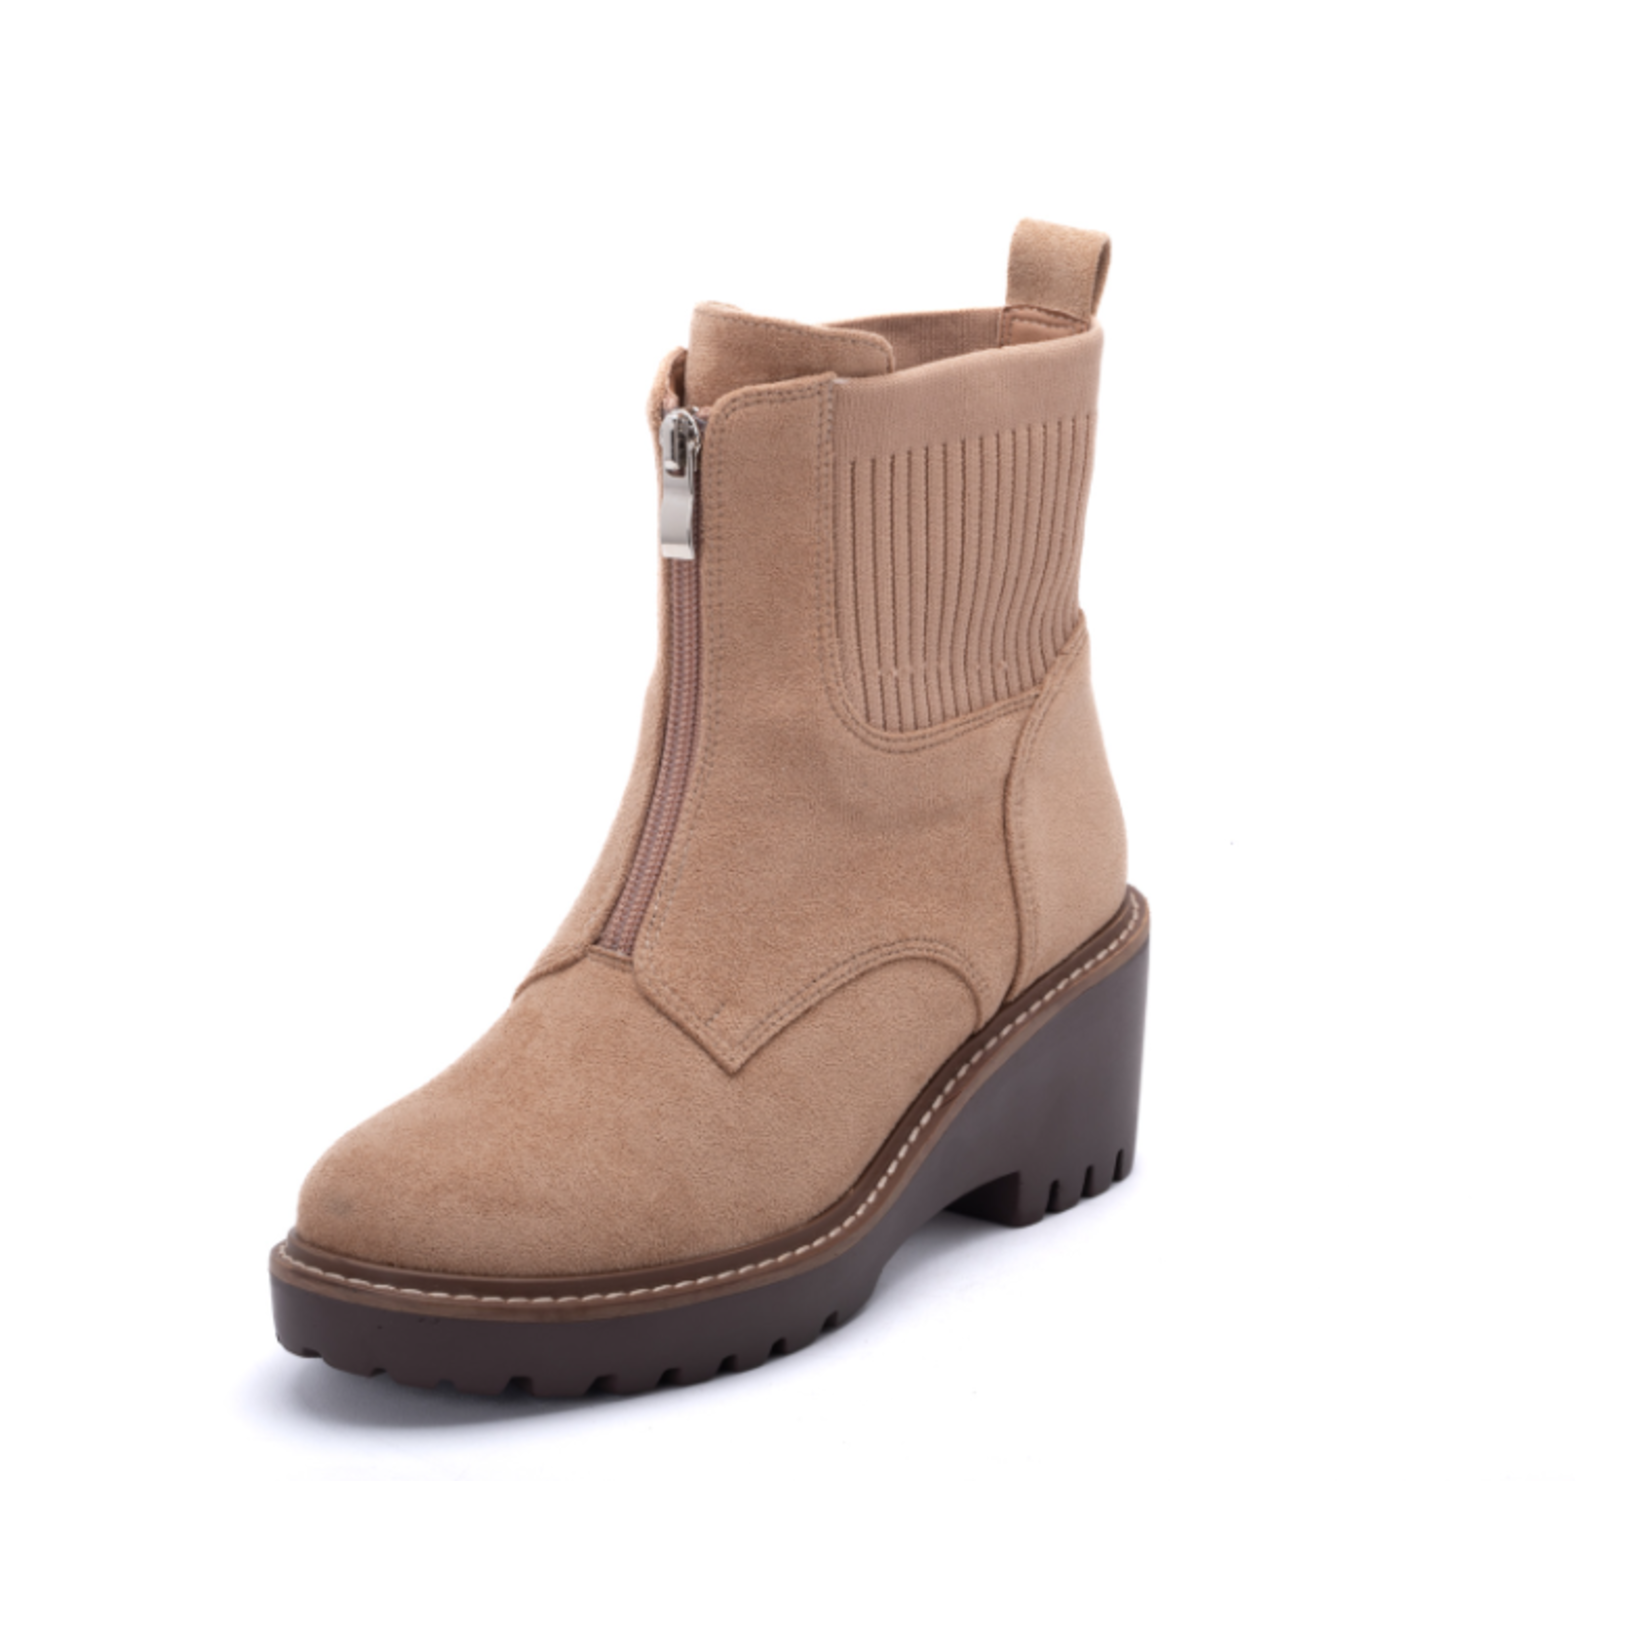 Corkys Corkys Boo Boots Caramel Suede